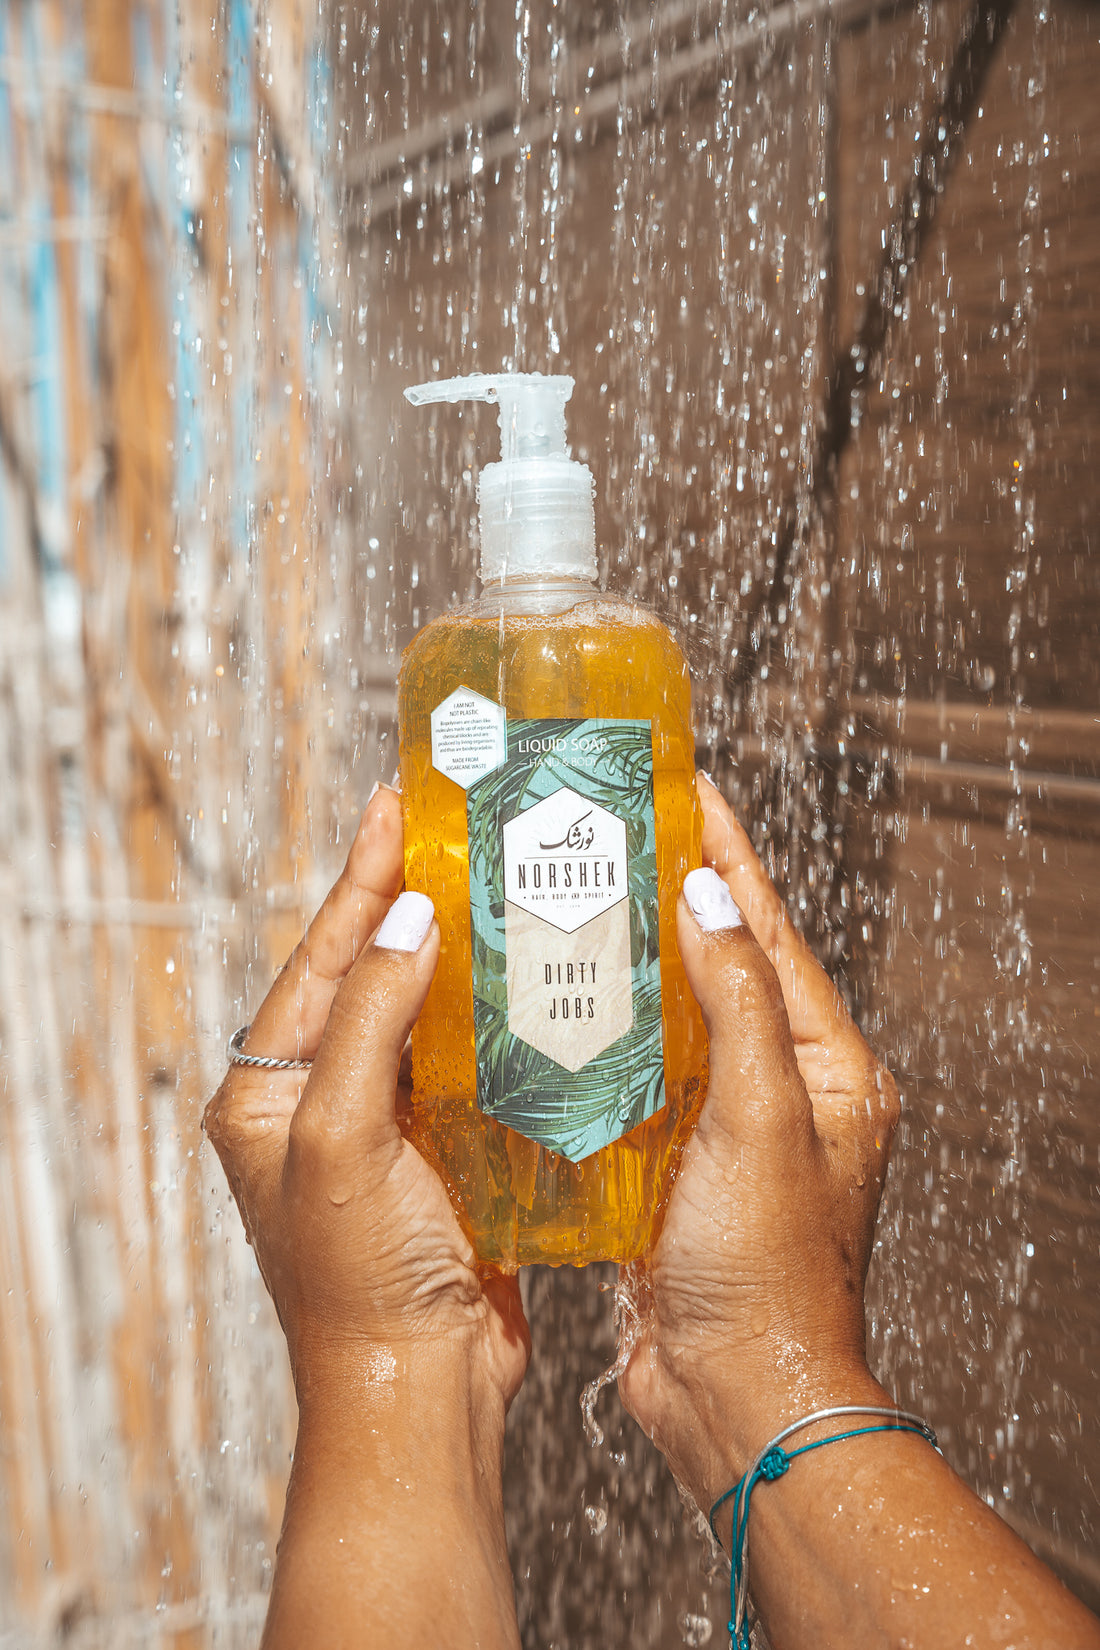 Norshek Dirty Jobs | Hand and Body Wash